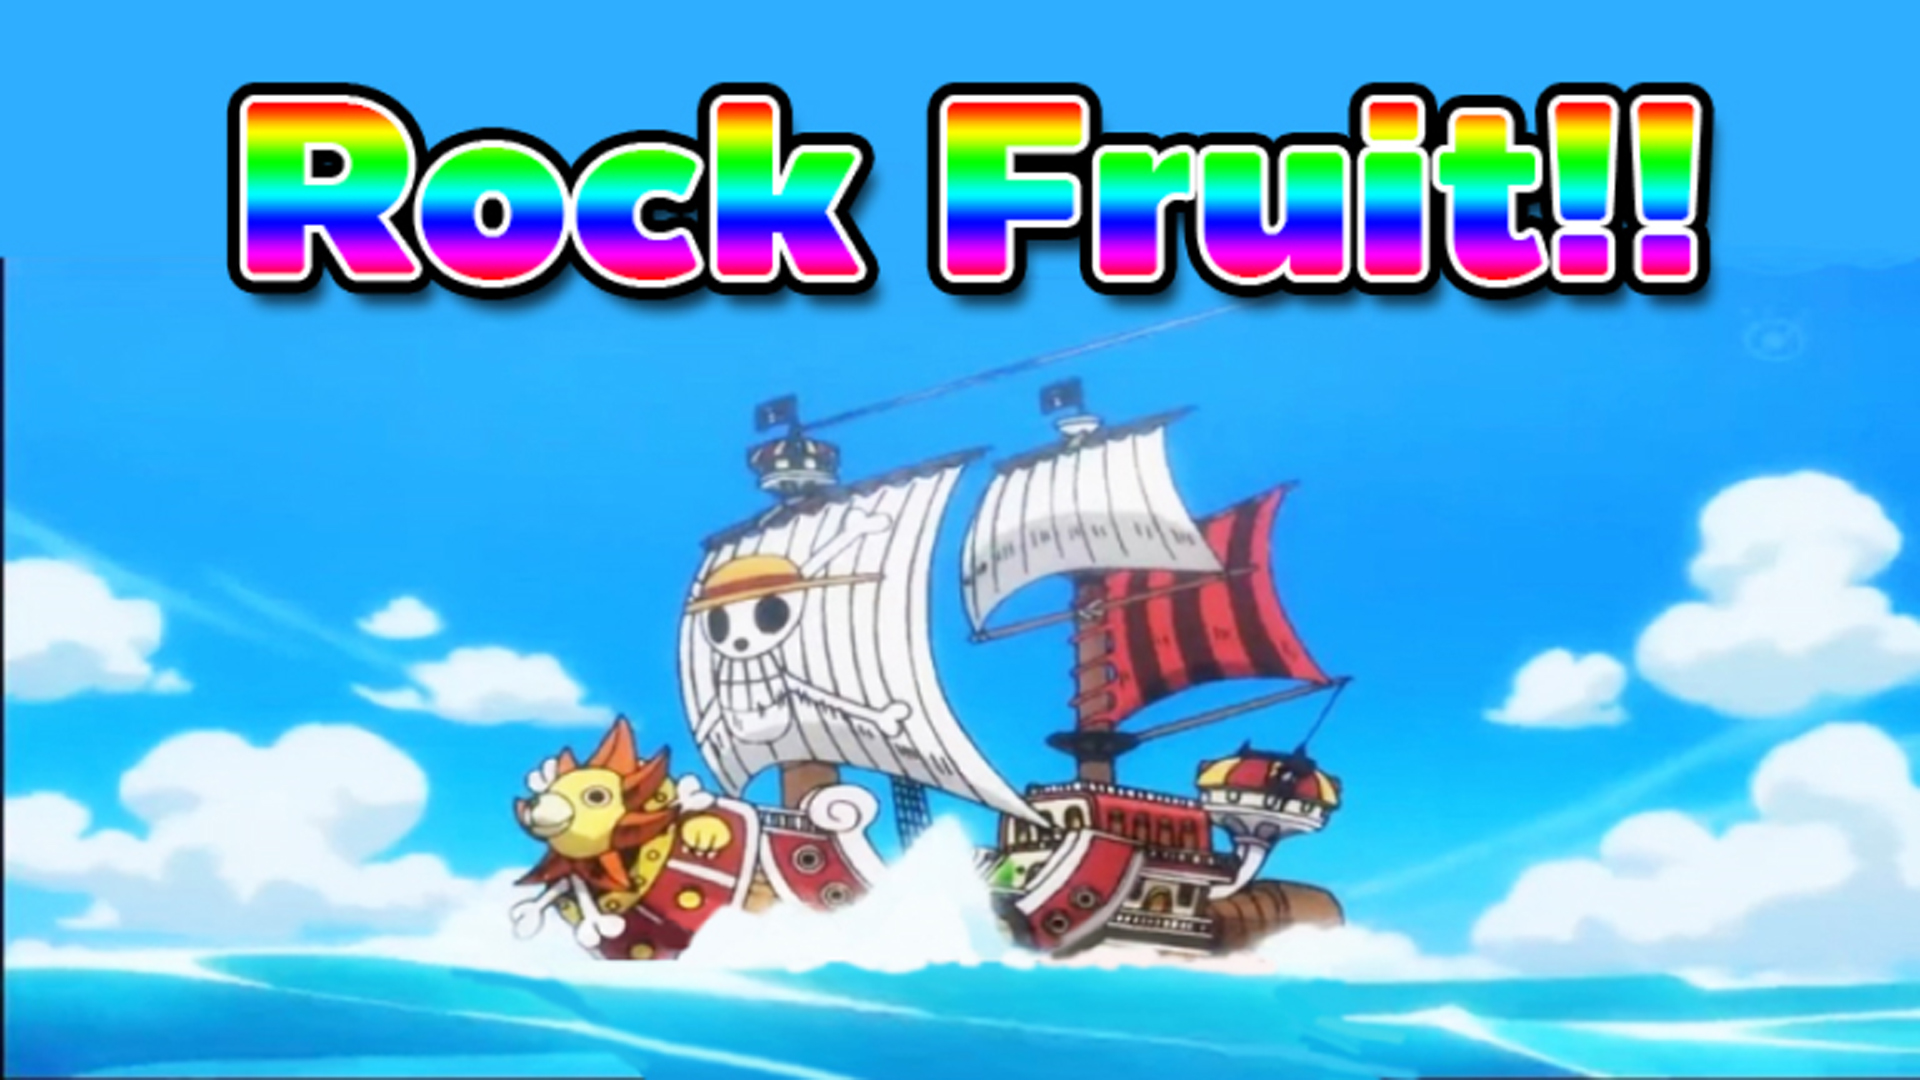 All Rock Fruit codes to redeem for EXP & Lucky Drop items